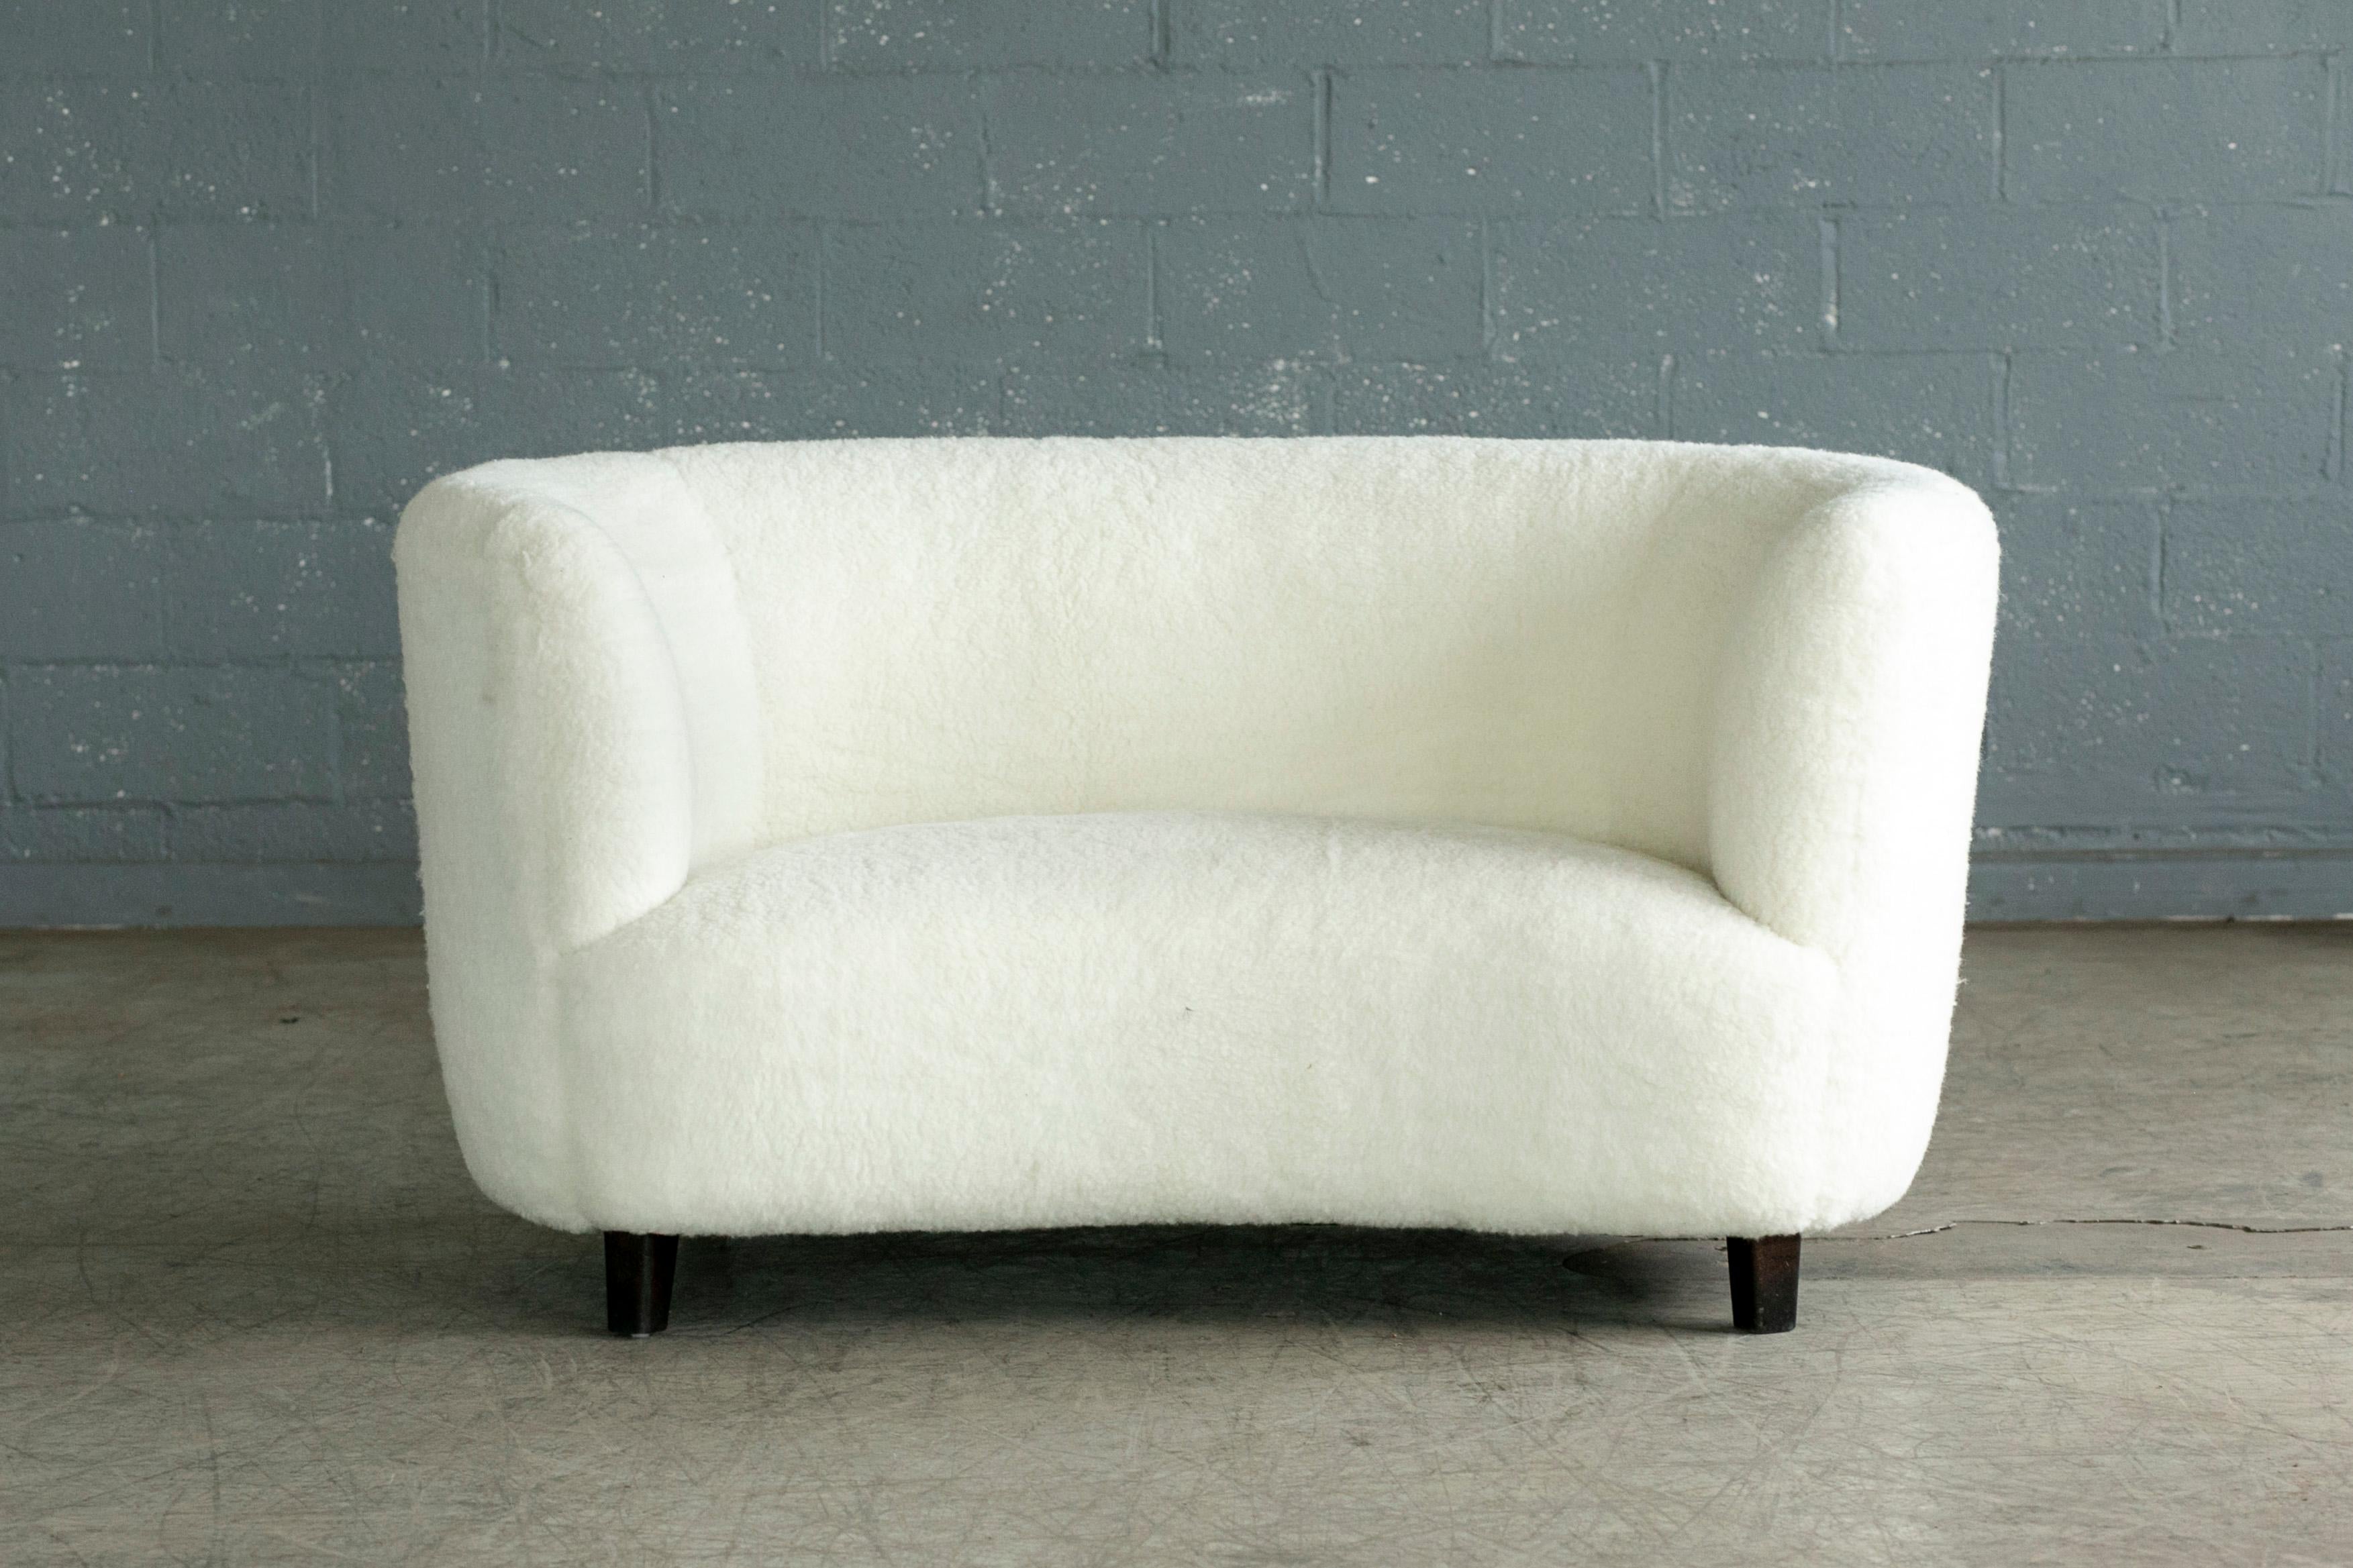 Banana shaped Viggo Boesen style curved two-seat sofa or loveseat made in Denmark in the 1940s. This sofa will make a strong statement in any room. Beautiful round organic voluptious lines. Fully refurbished and newly upholstered with ivory